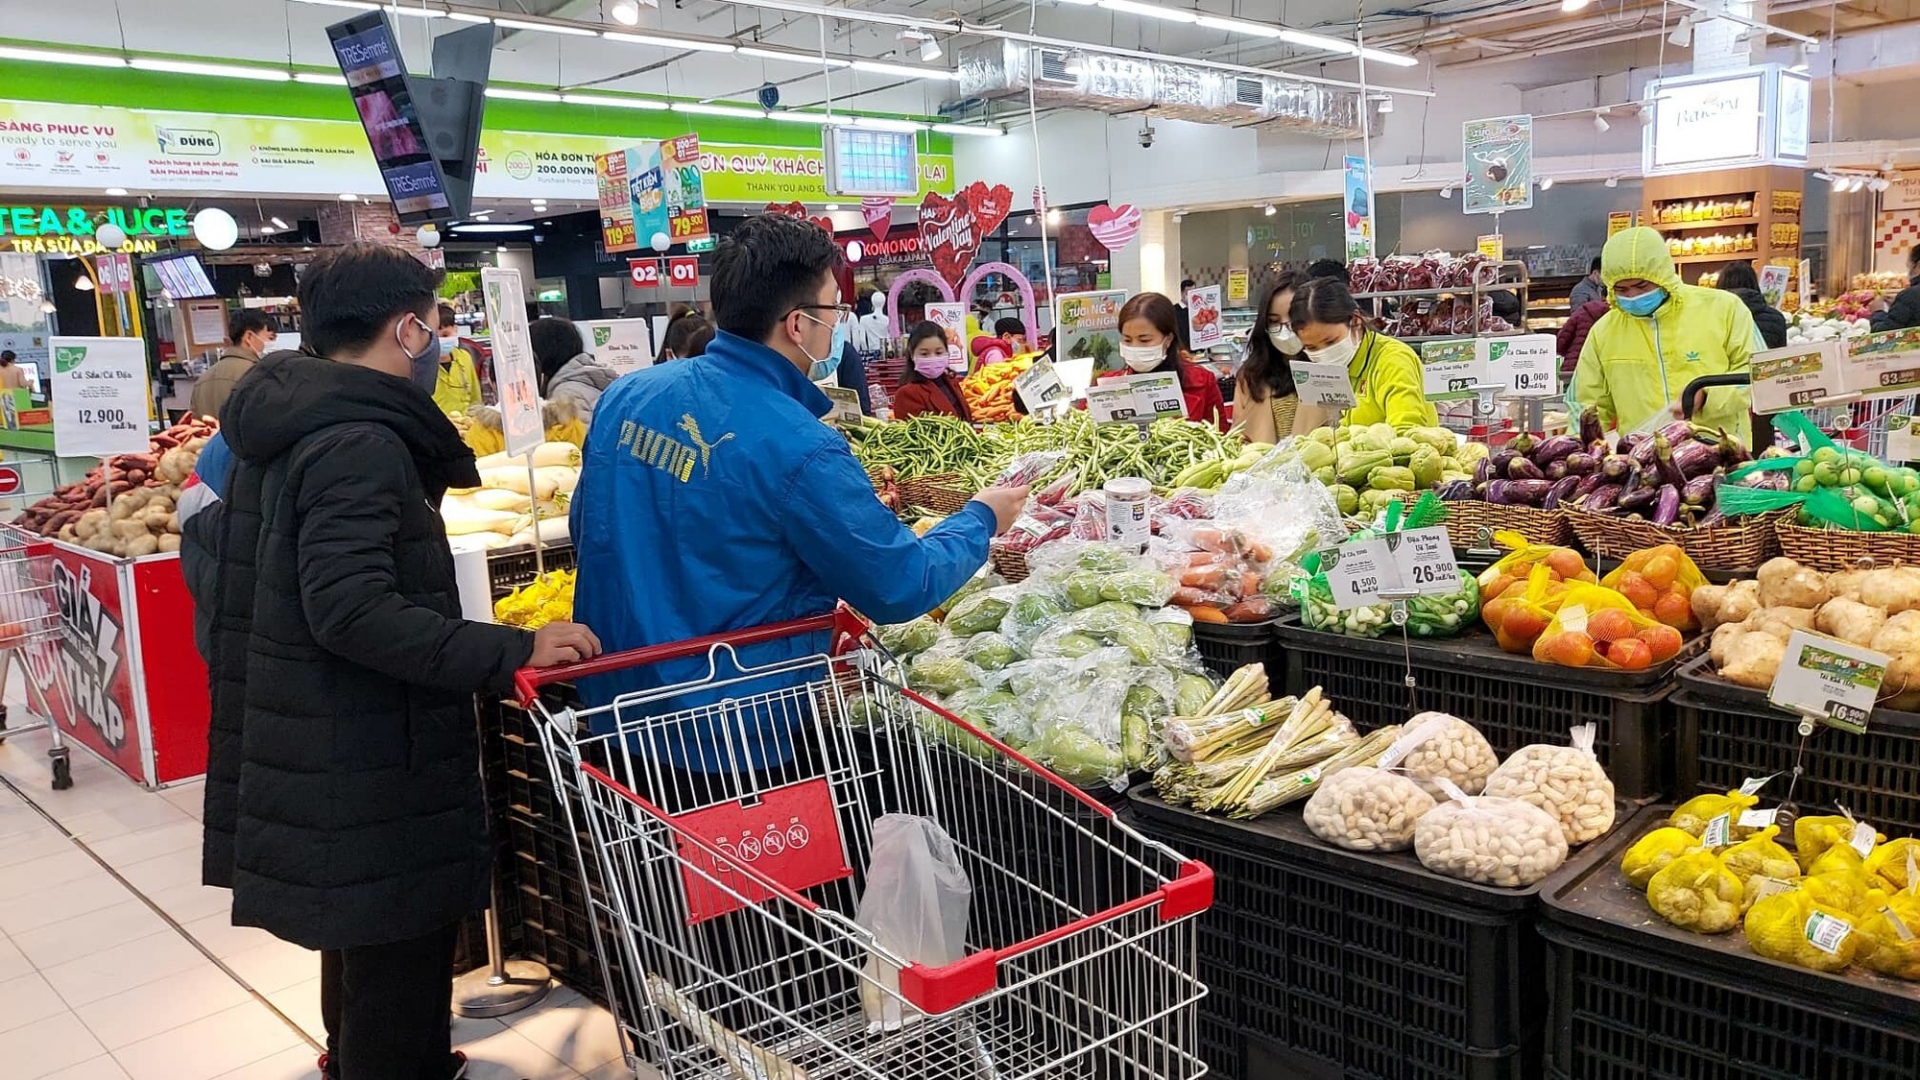 Vietnam Consumer Confidence down in the face of COVID-19